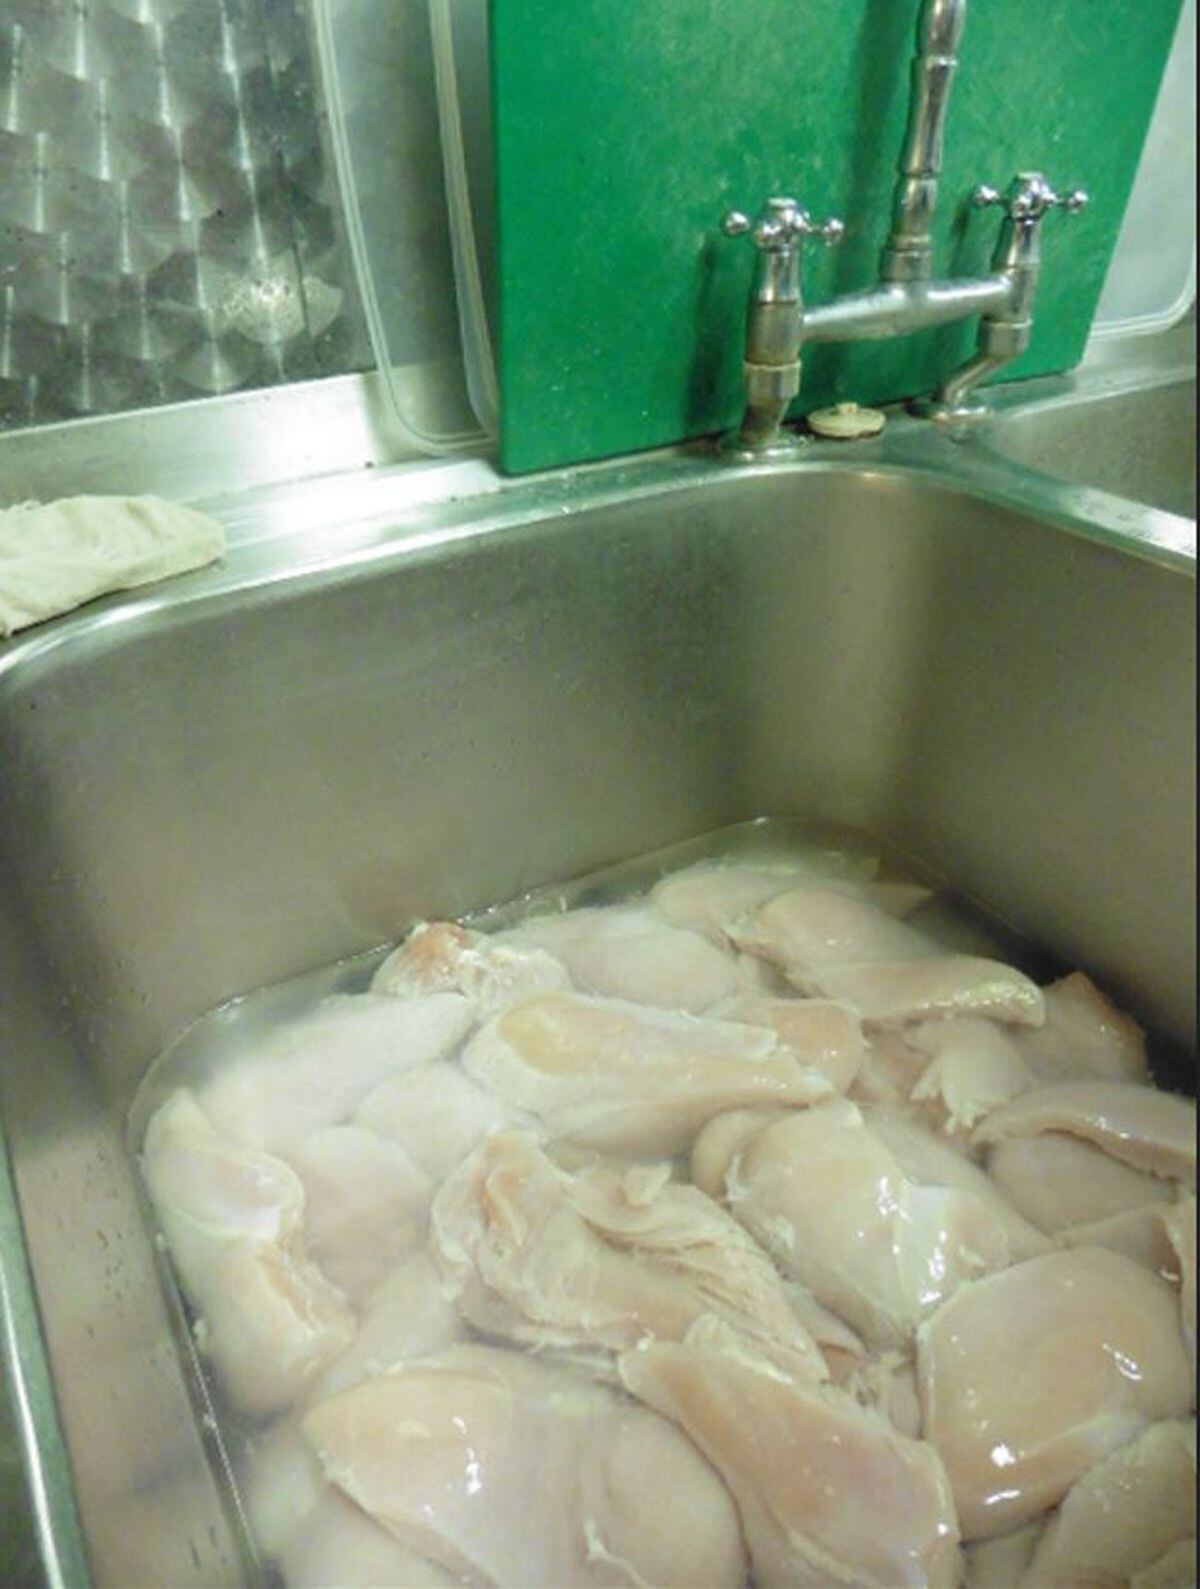 Raw chicken in the sink at Momma's Pizza. Photo: Telford & Wrekin Council